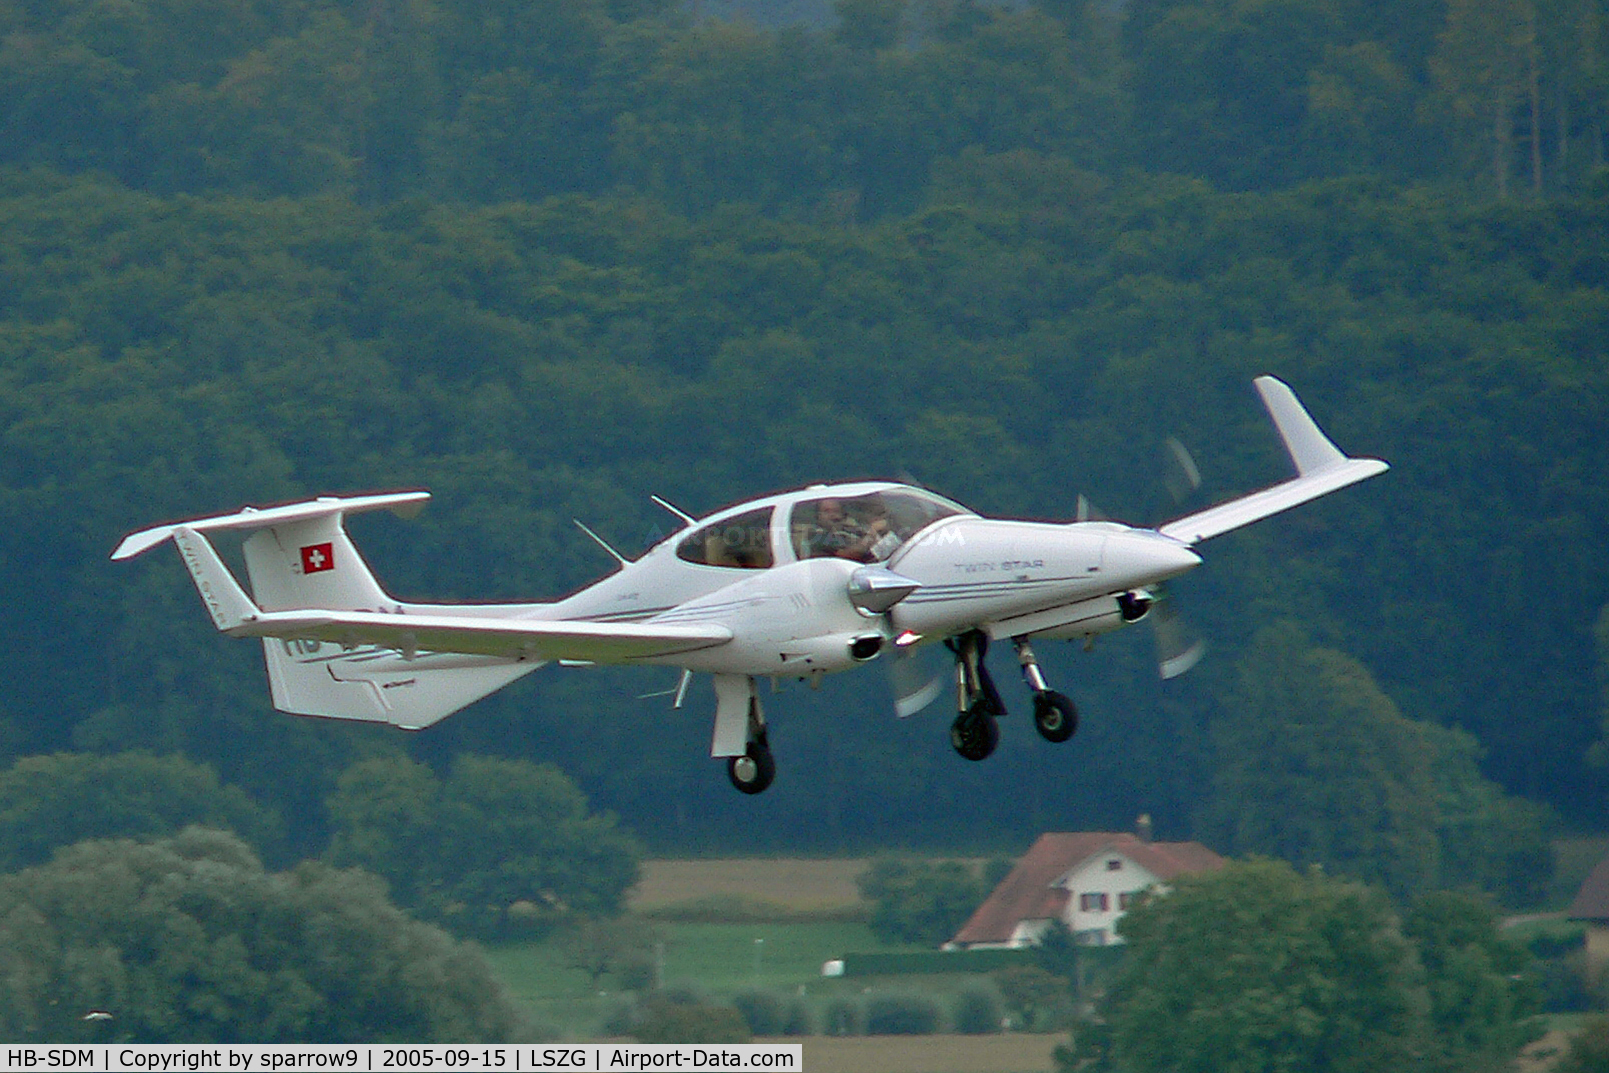 HB-SDM, 2005 Diamond DA-42 Twin Star C/N 42.039, Taking-off Grenchen a month after its HB-registration.